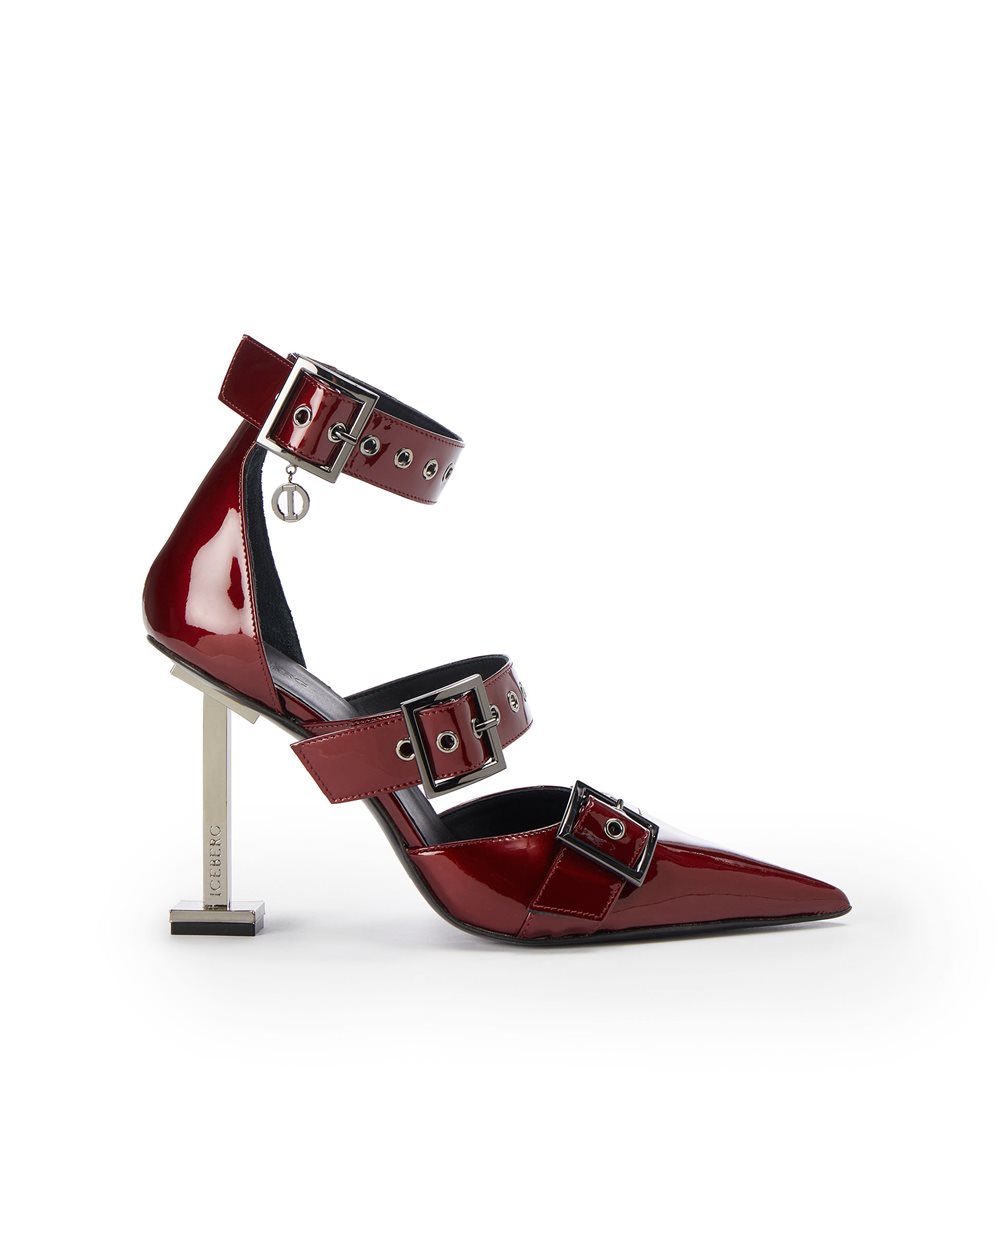 Pumps with iconic heel - Accessories | Iceberg - Official Website